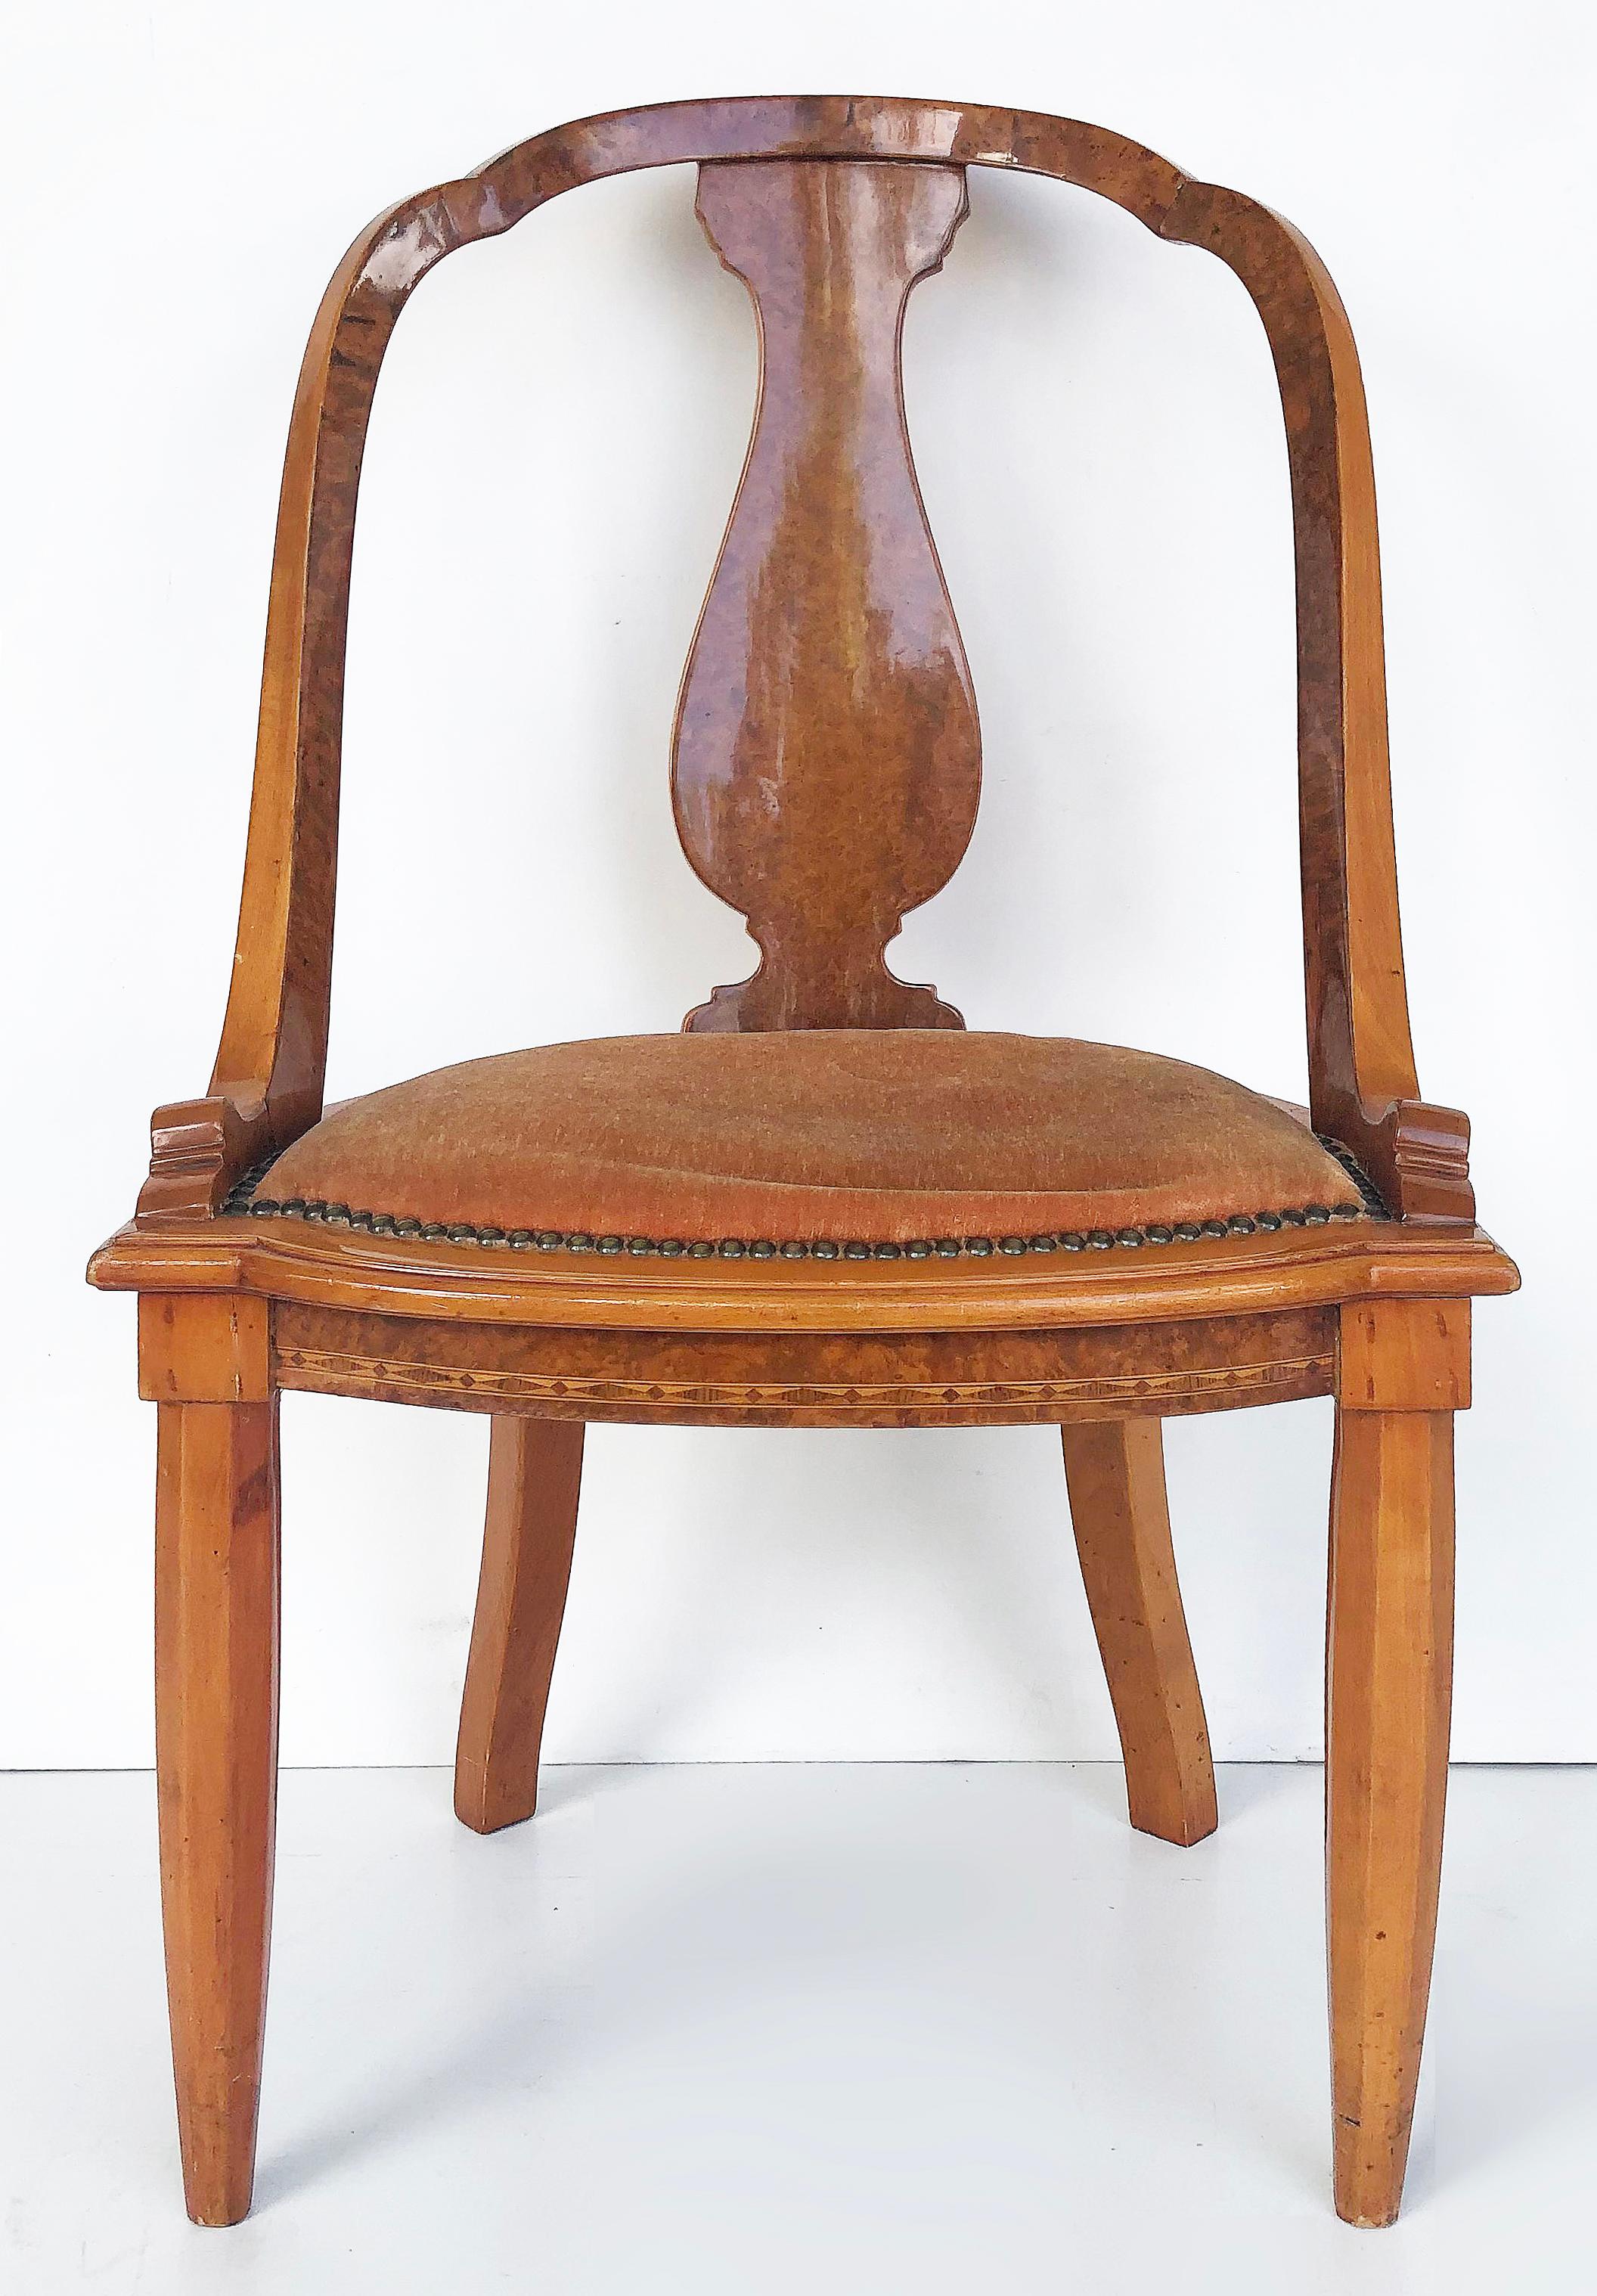 1920s Grained and Fine Austrian Biedermeier Burlwood Table and 2 Chairs.

Offered for sale is a 3-piece set of Austrian Biedermeier burlwood furniture. The centerpiece of the set is a square Burlwood table with four legs rising from the center of